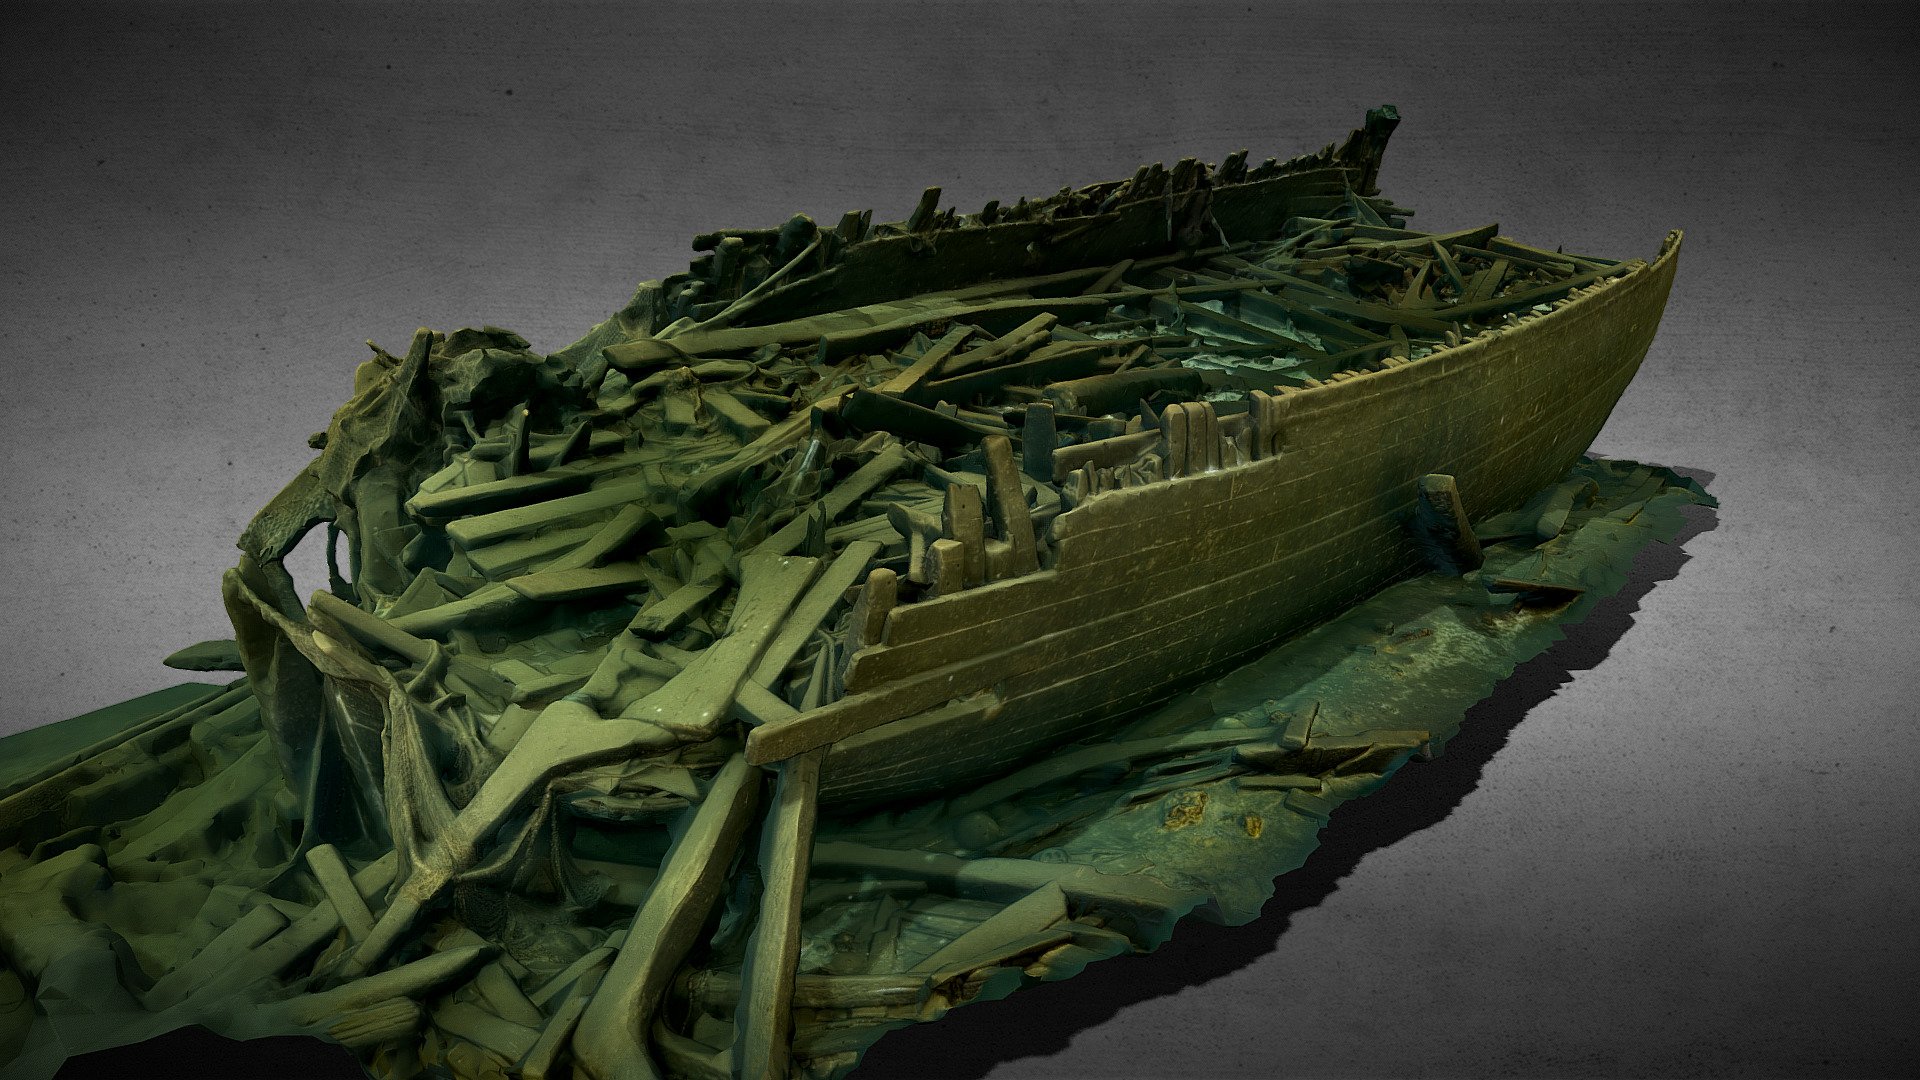 This wooden sailship is most probably a 19th century wreck. It lies on 82 meters depth, north-east of Wladyslawowo, Poland. The cargo of this ship was grain - the white substance all over the wreck is mouldy grain. This wreck was visited as a part of Baltictech expedition organized in cooperation with National Maritime Museum in Gdansk. To our knowledge, it was only visited once before, by polish navy divers. No one else has ever seen this wreck. The model was created from over 7000 photographs taken during 35 minutes on the bottom, using a multiple camera and video lights rig mounted on a DPV 3d model